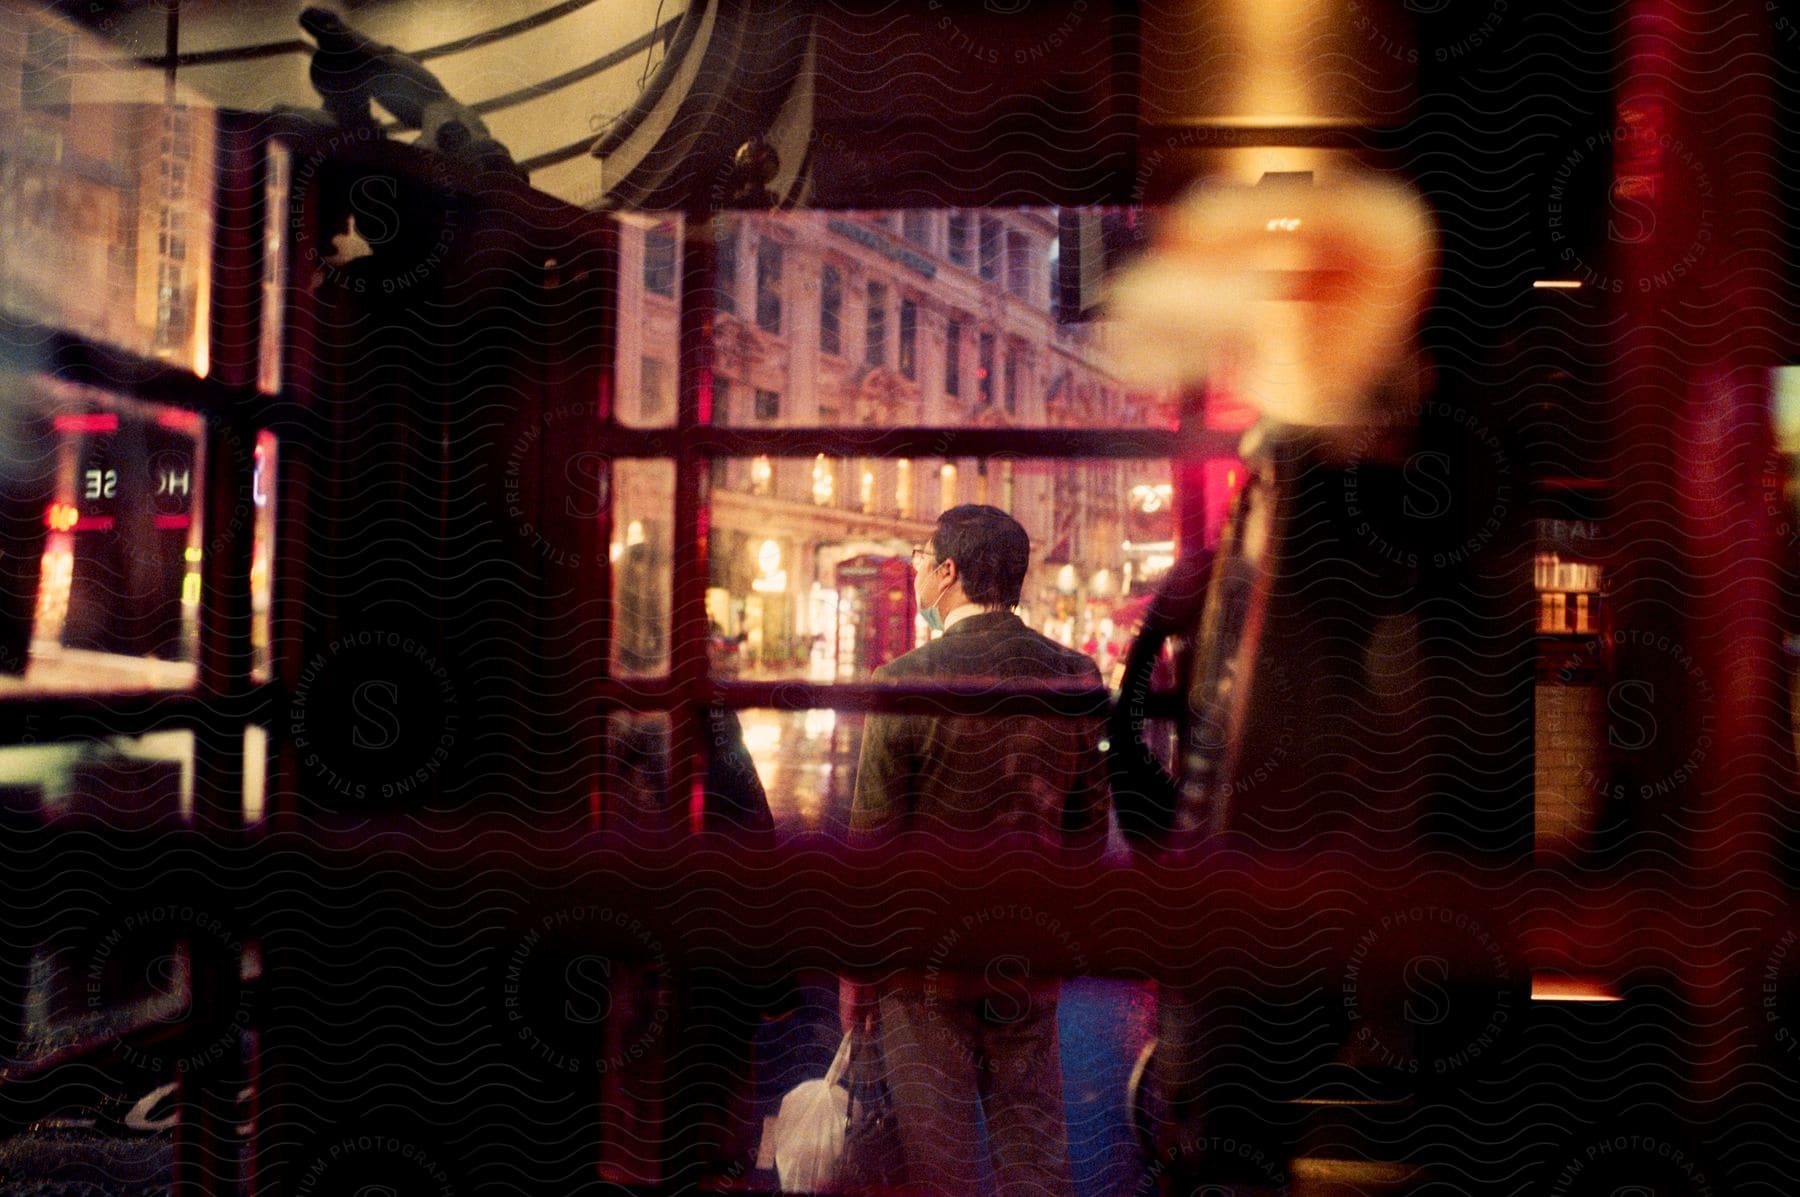 A man stands in a bustling London street, viewed through a phone booth's window, with an illuminated old-style hotel ahead.